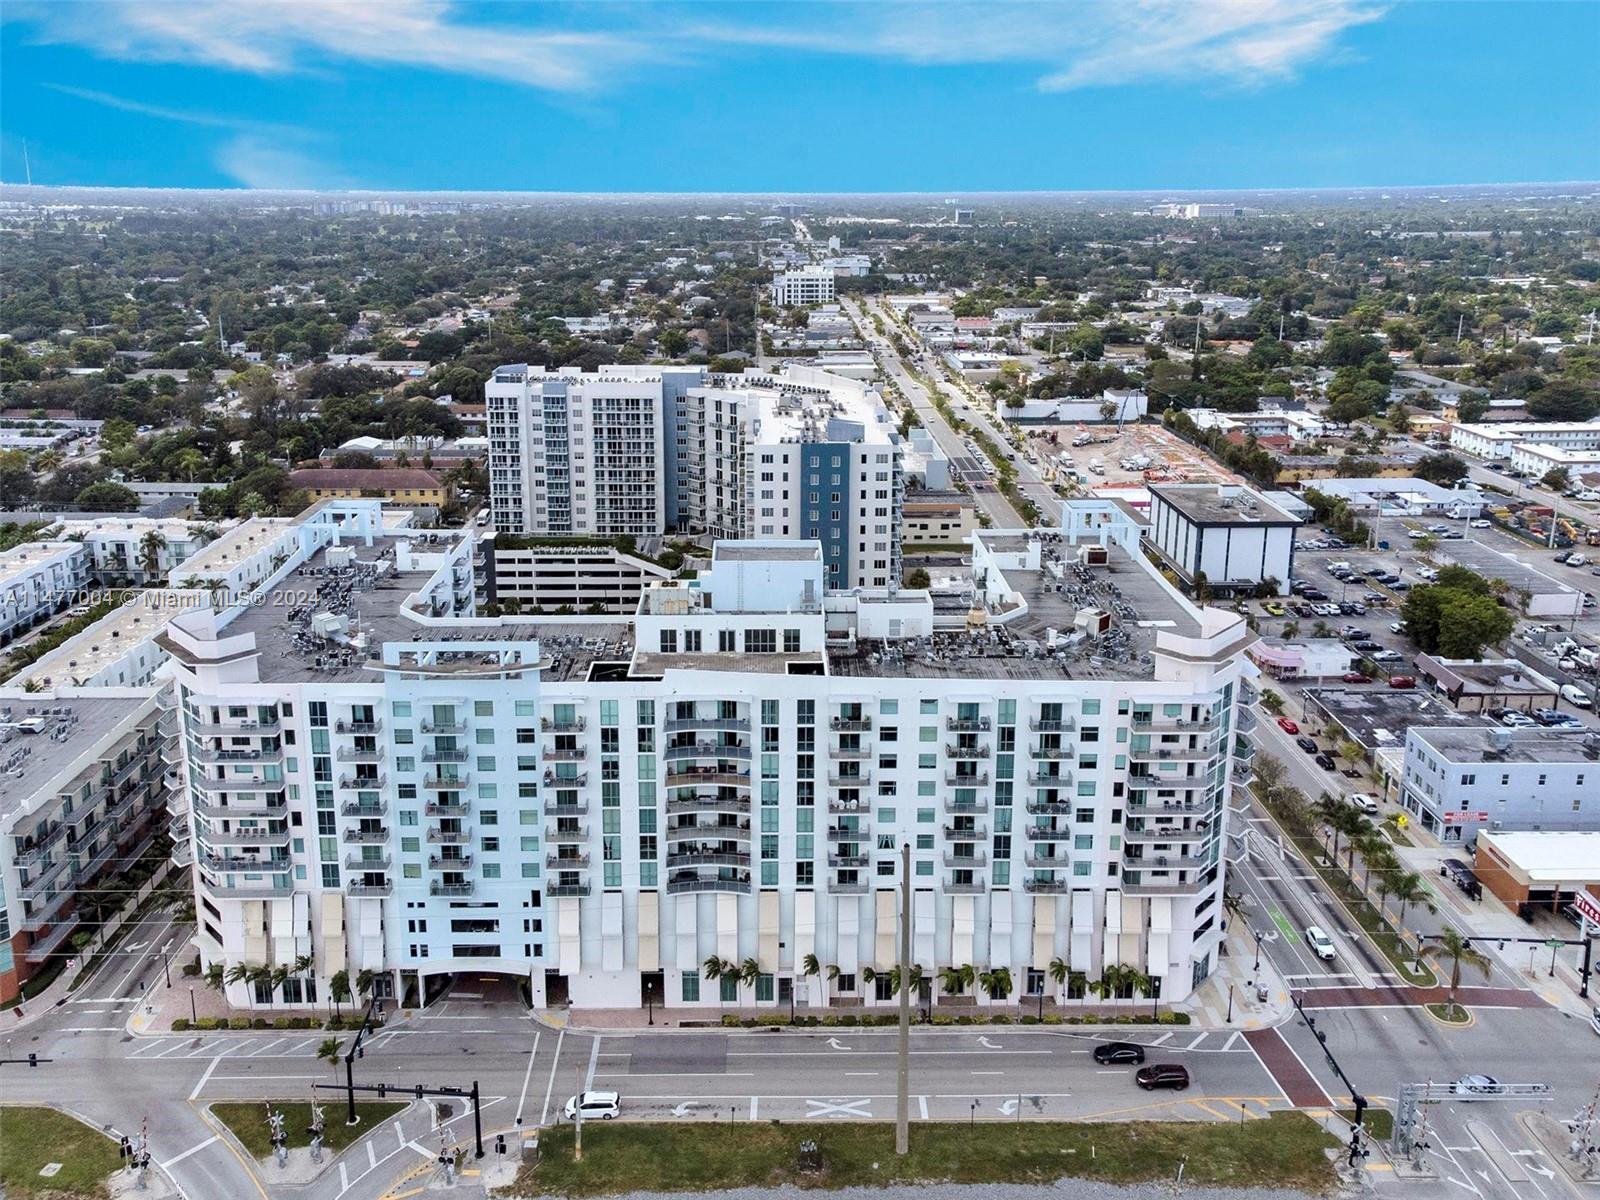 Photo of 140 S Dixie Hwy #702 in Hollywood, FL